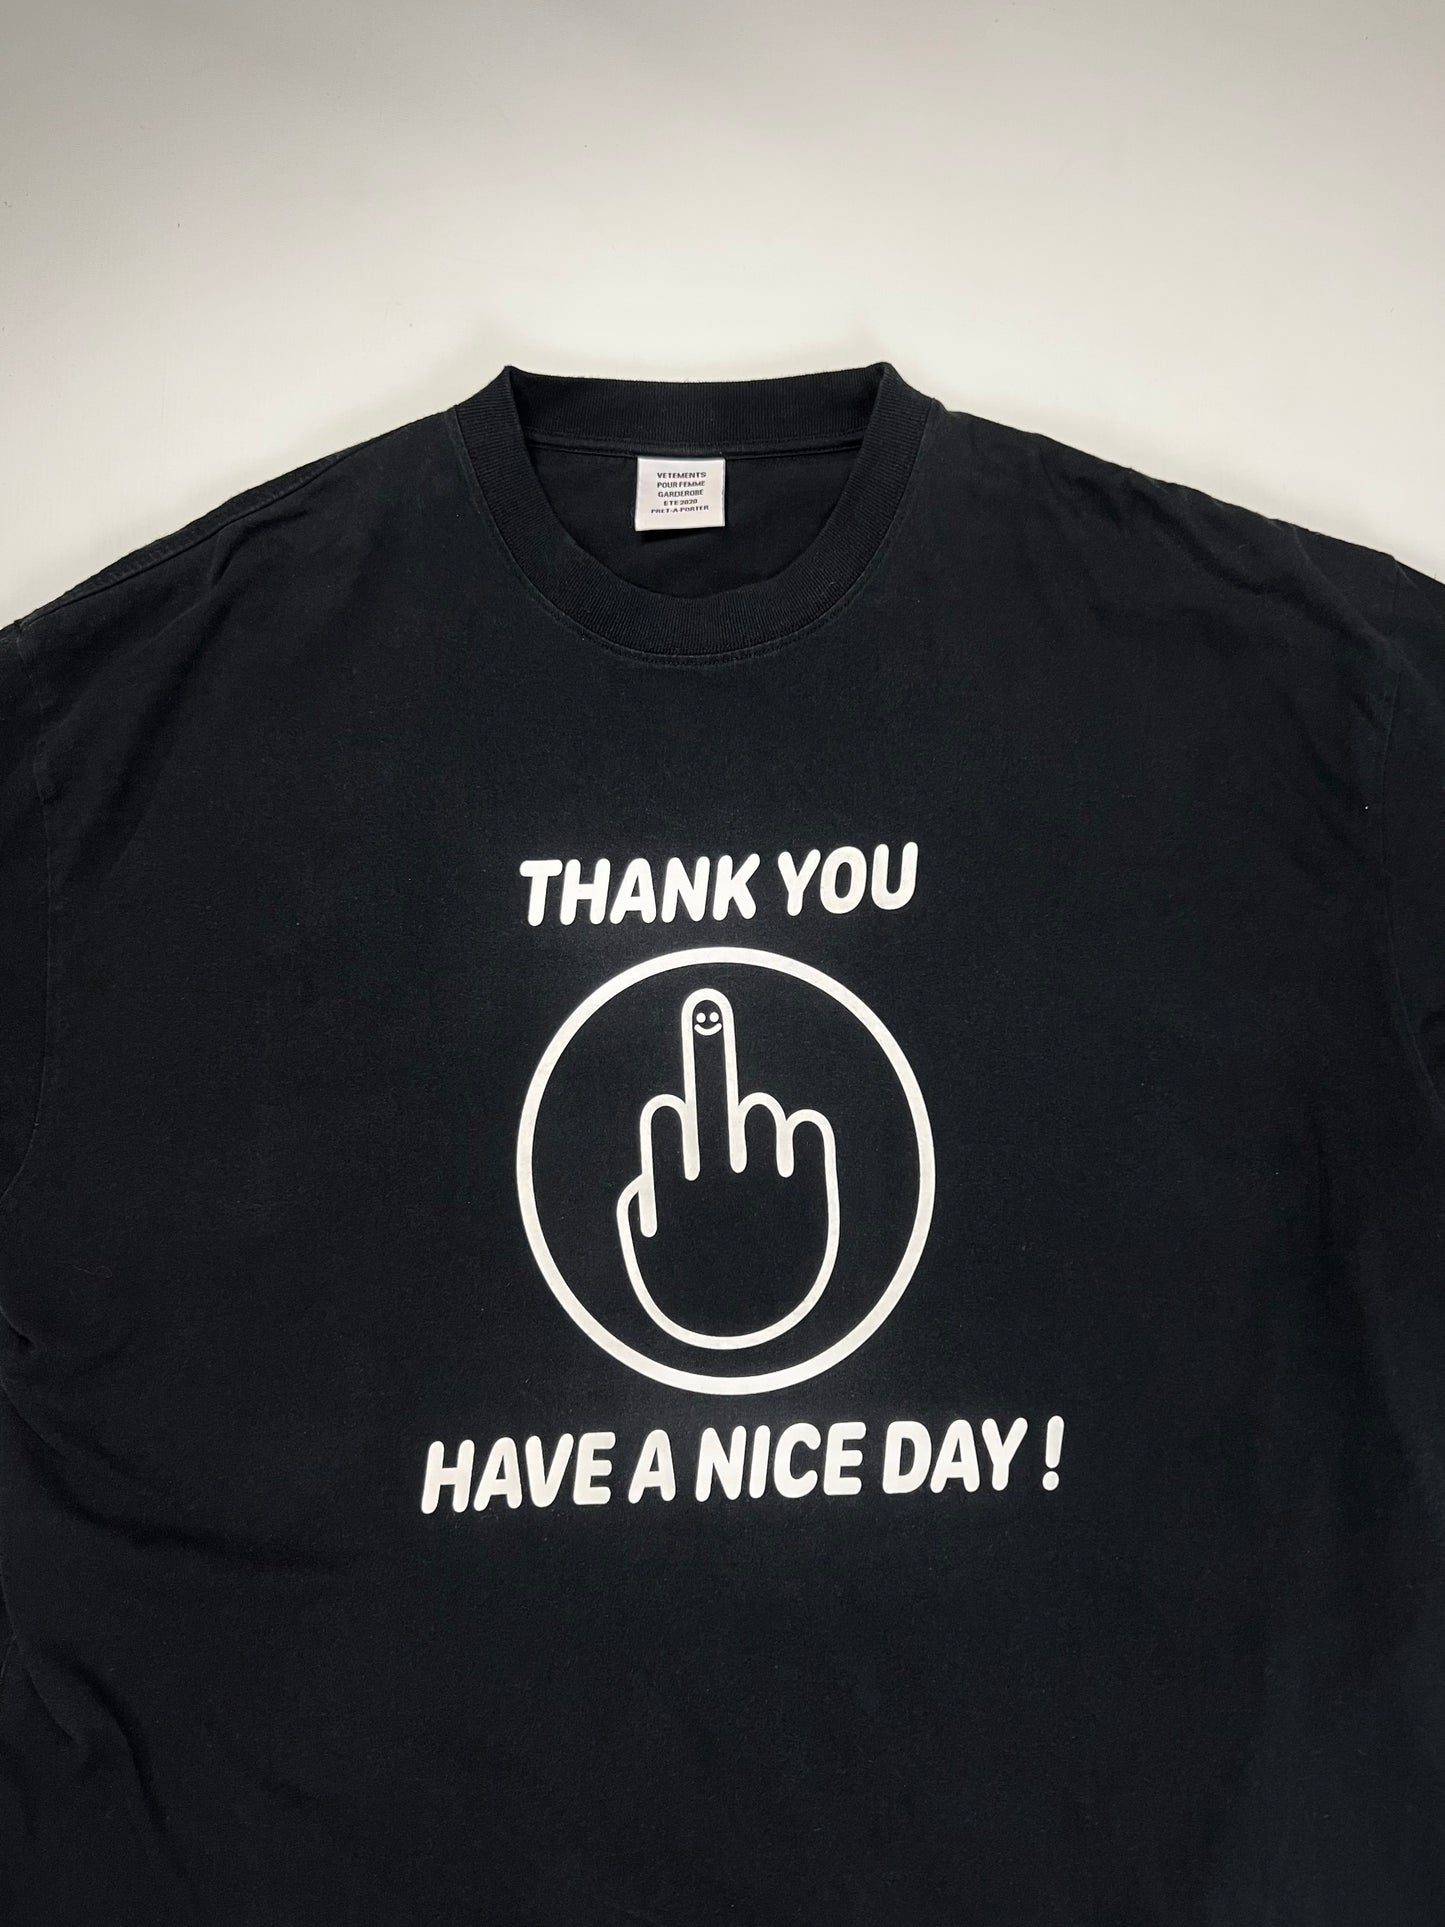 Vetements SS20 Thank you have a nice day Upcycled cut up tshirt dress SZ:S